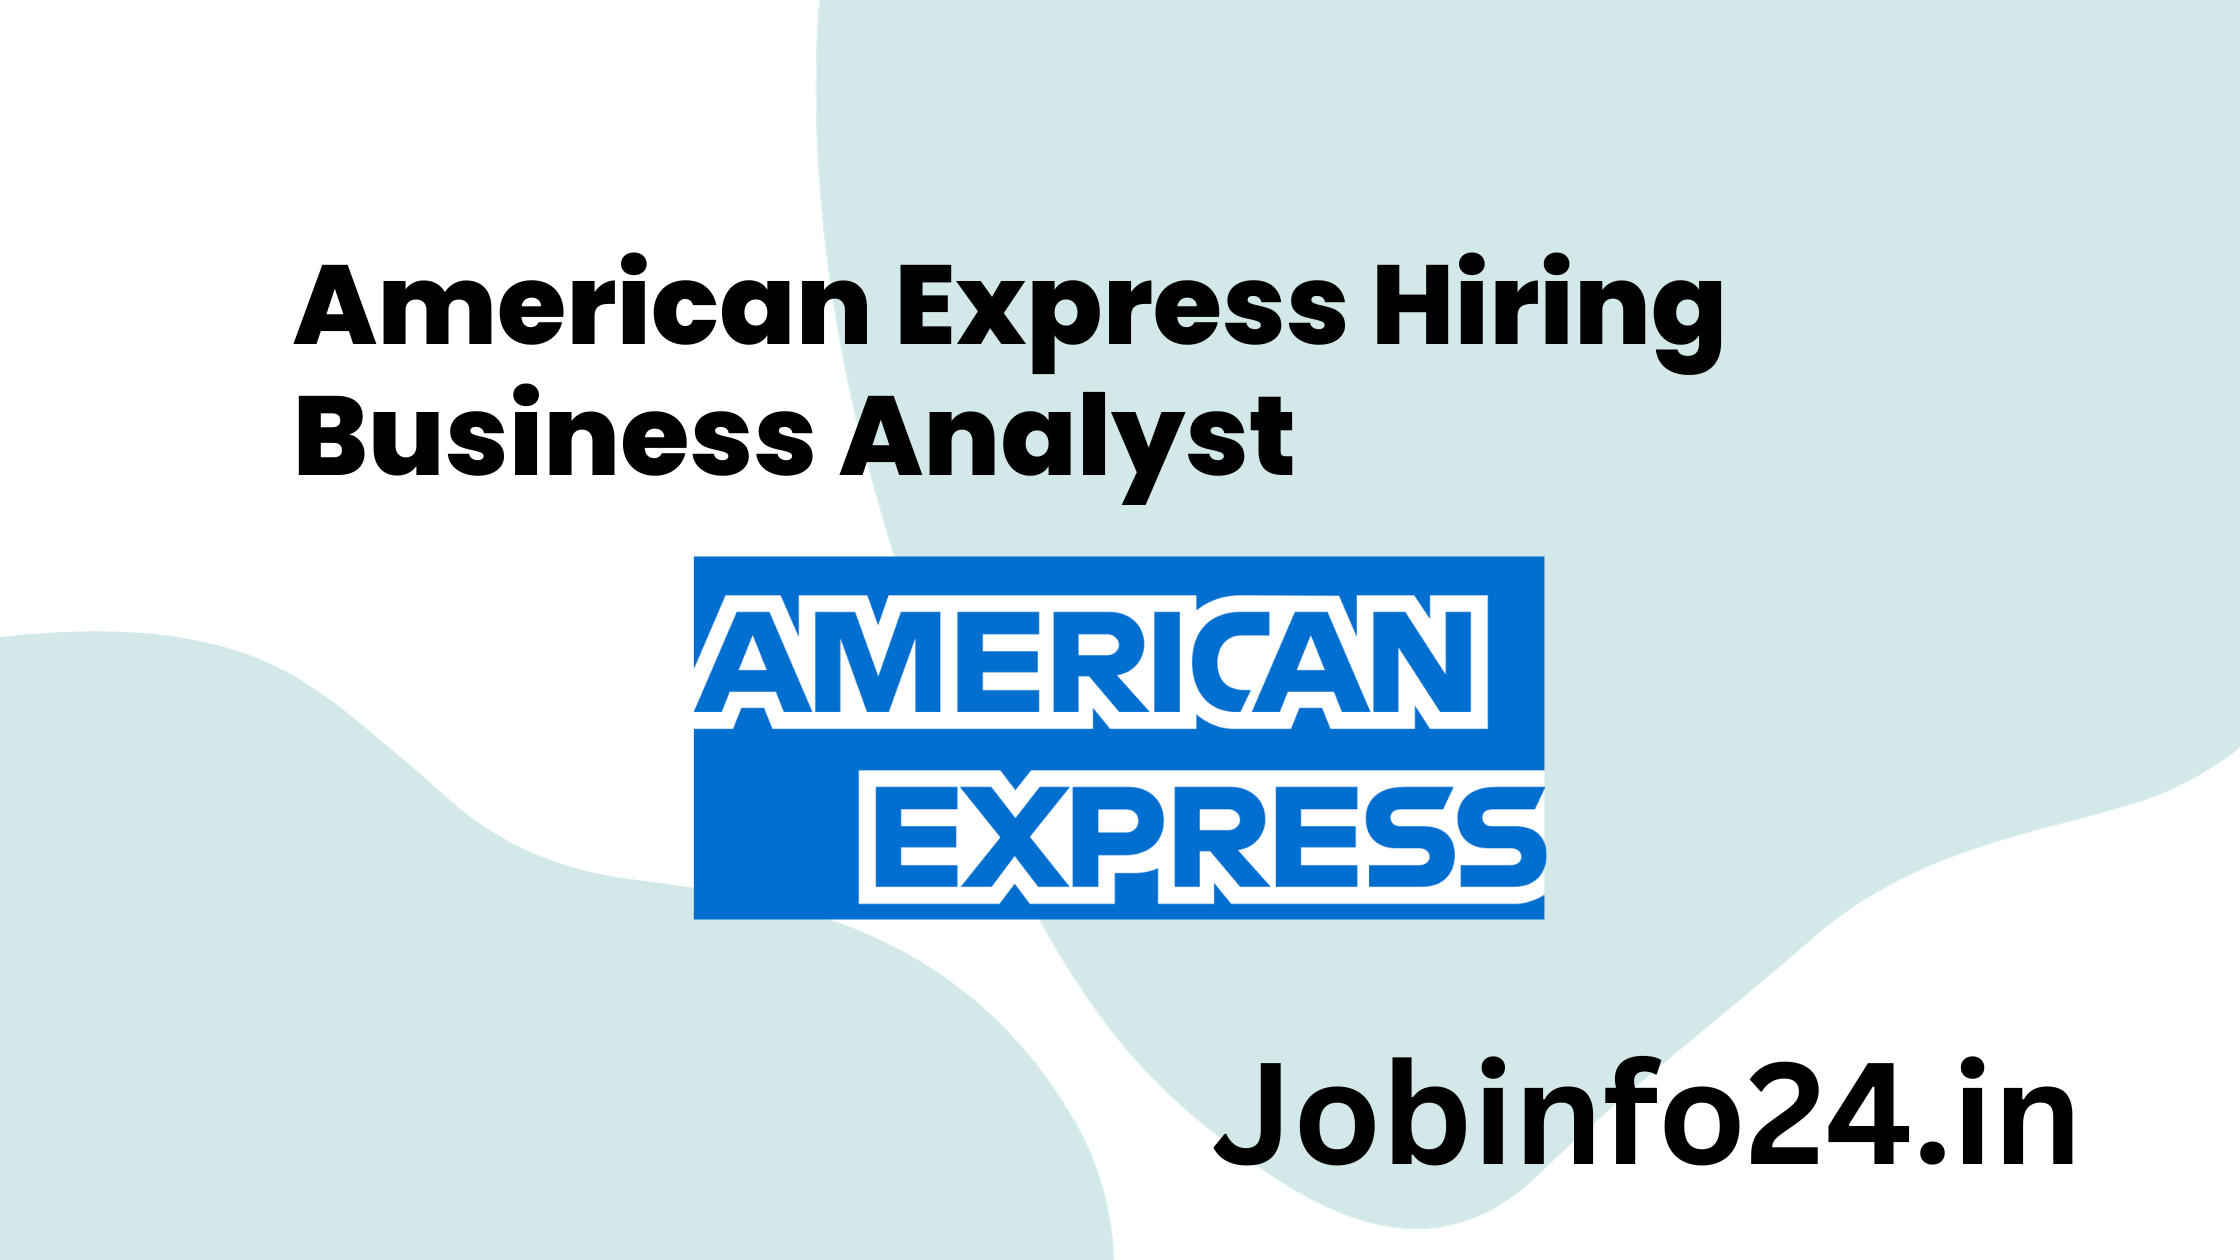 American Express Hiring Business Analyst